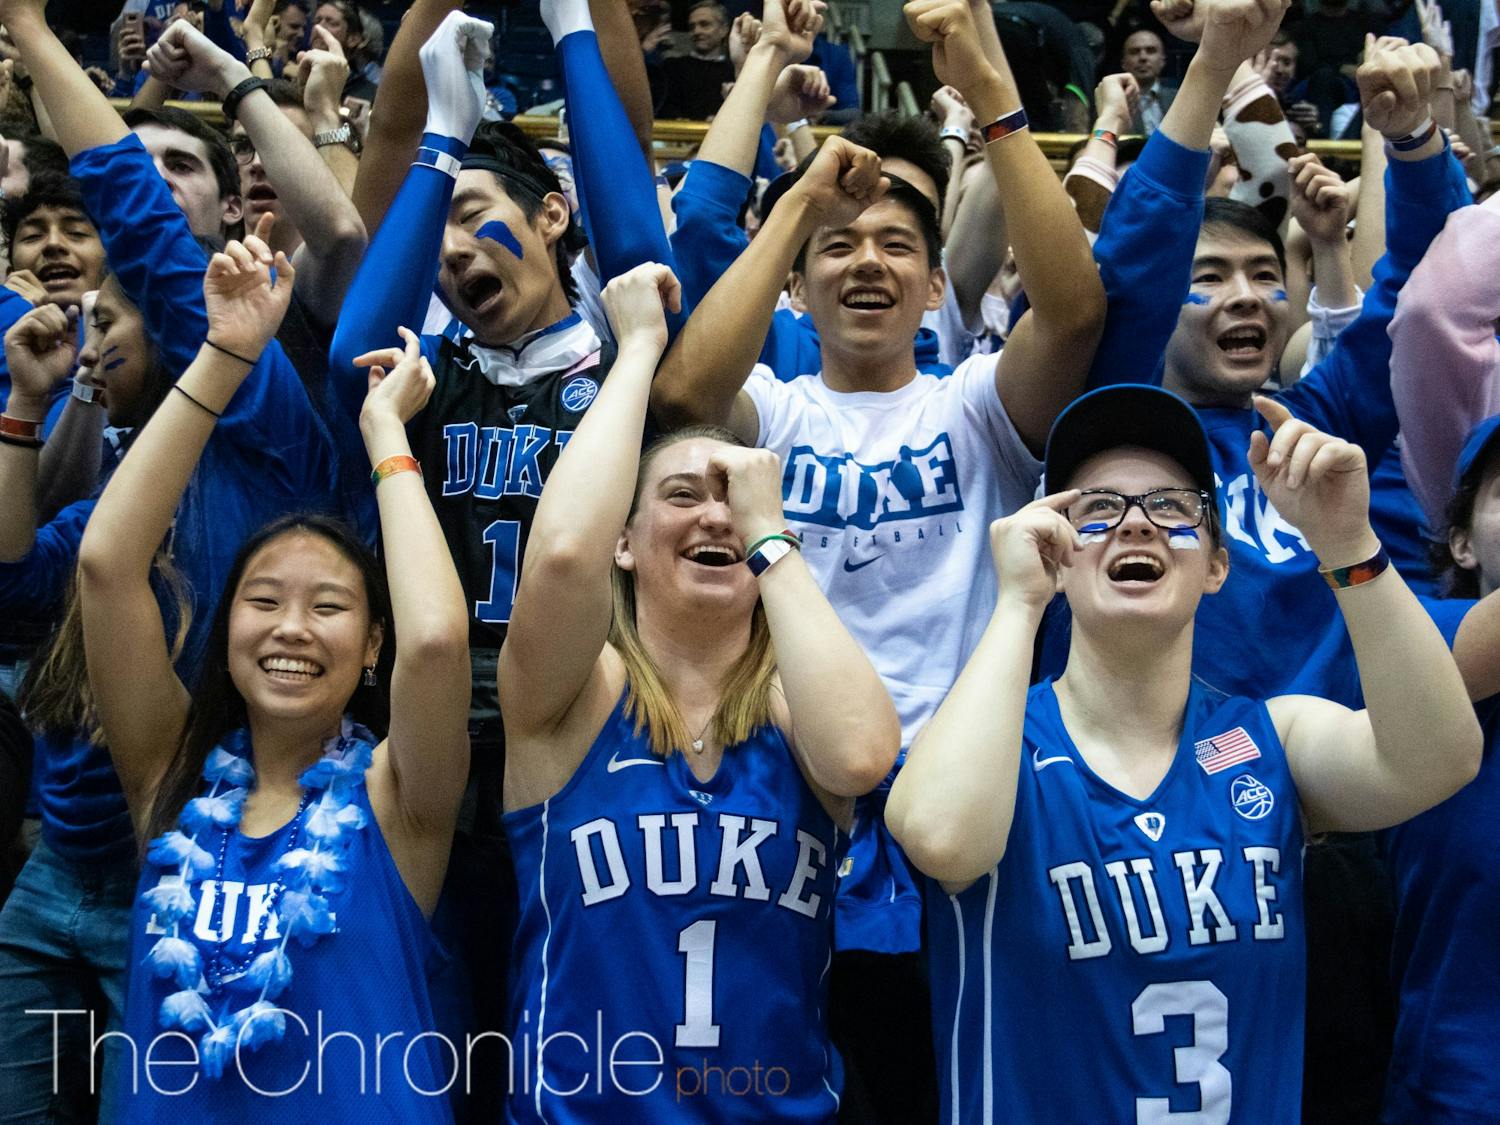 The Cameron Crazies were treated with a special surprise Monday.